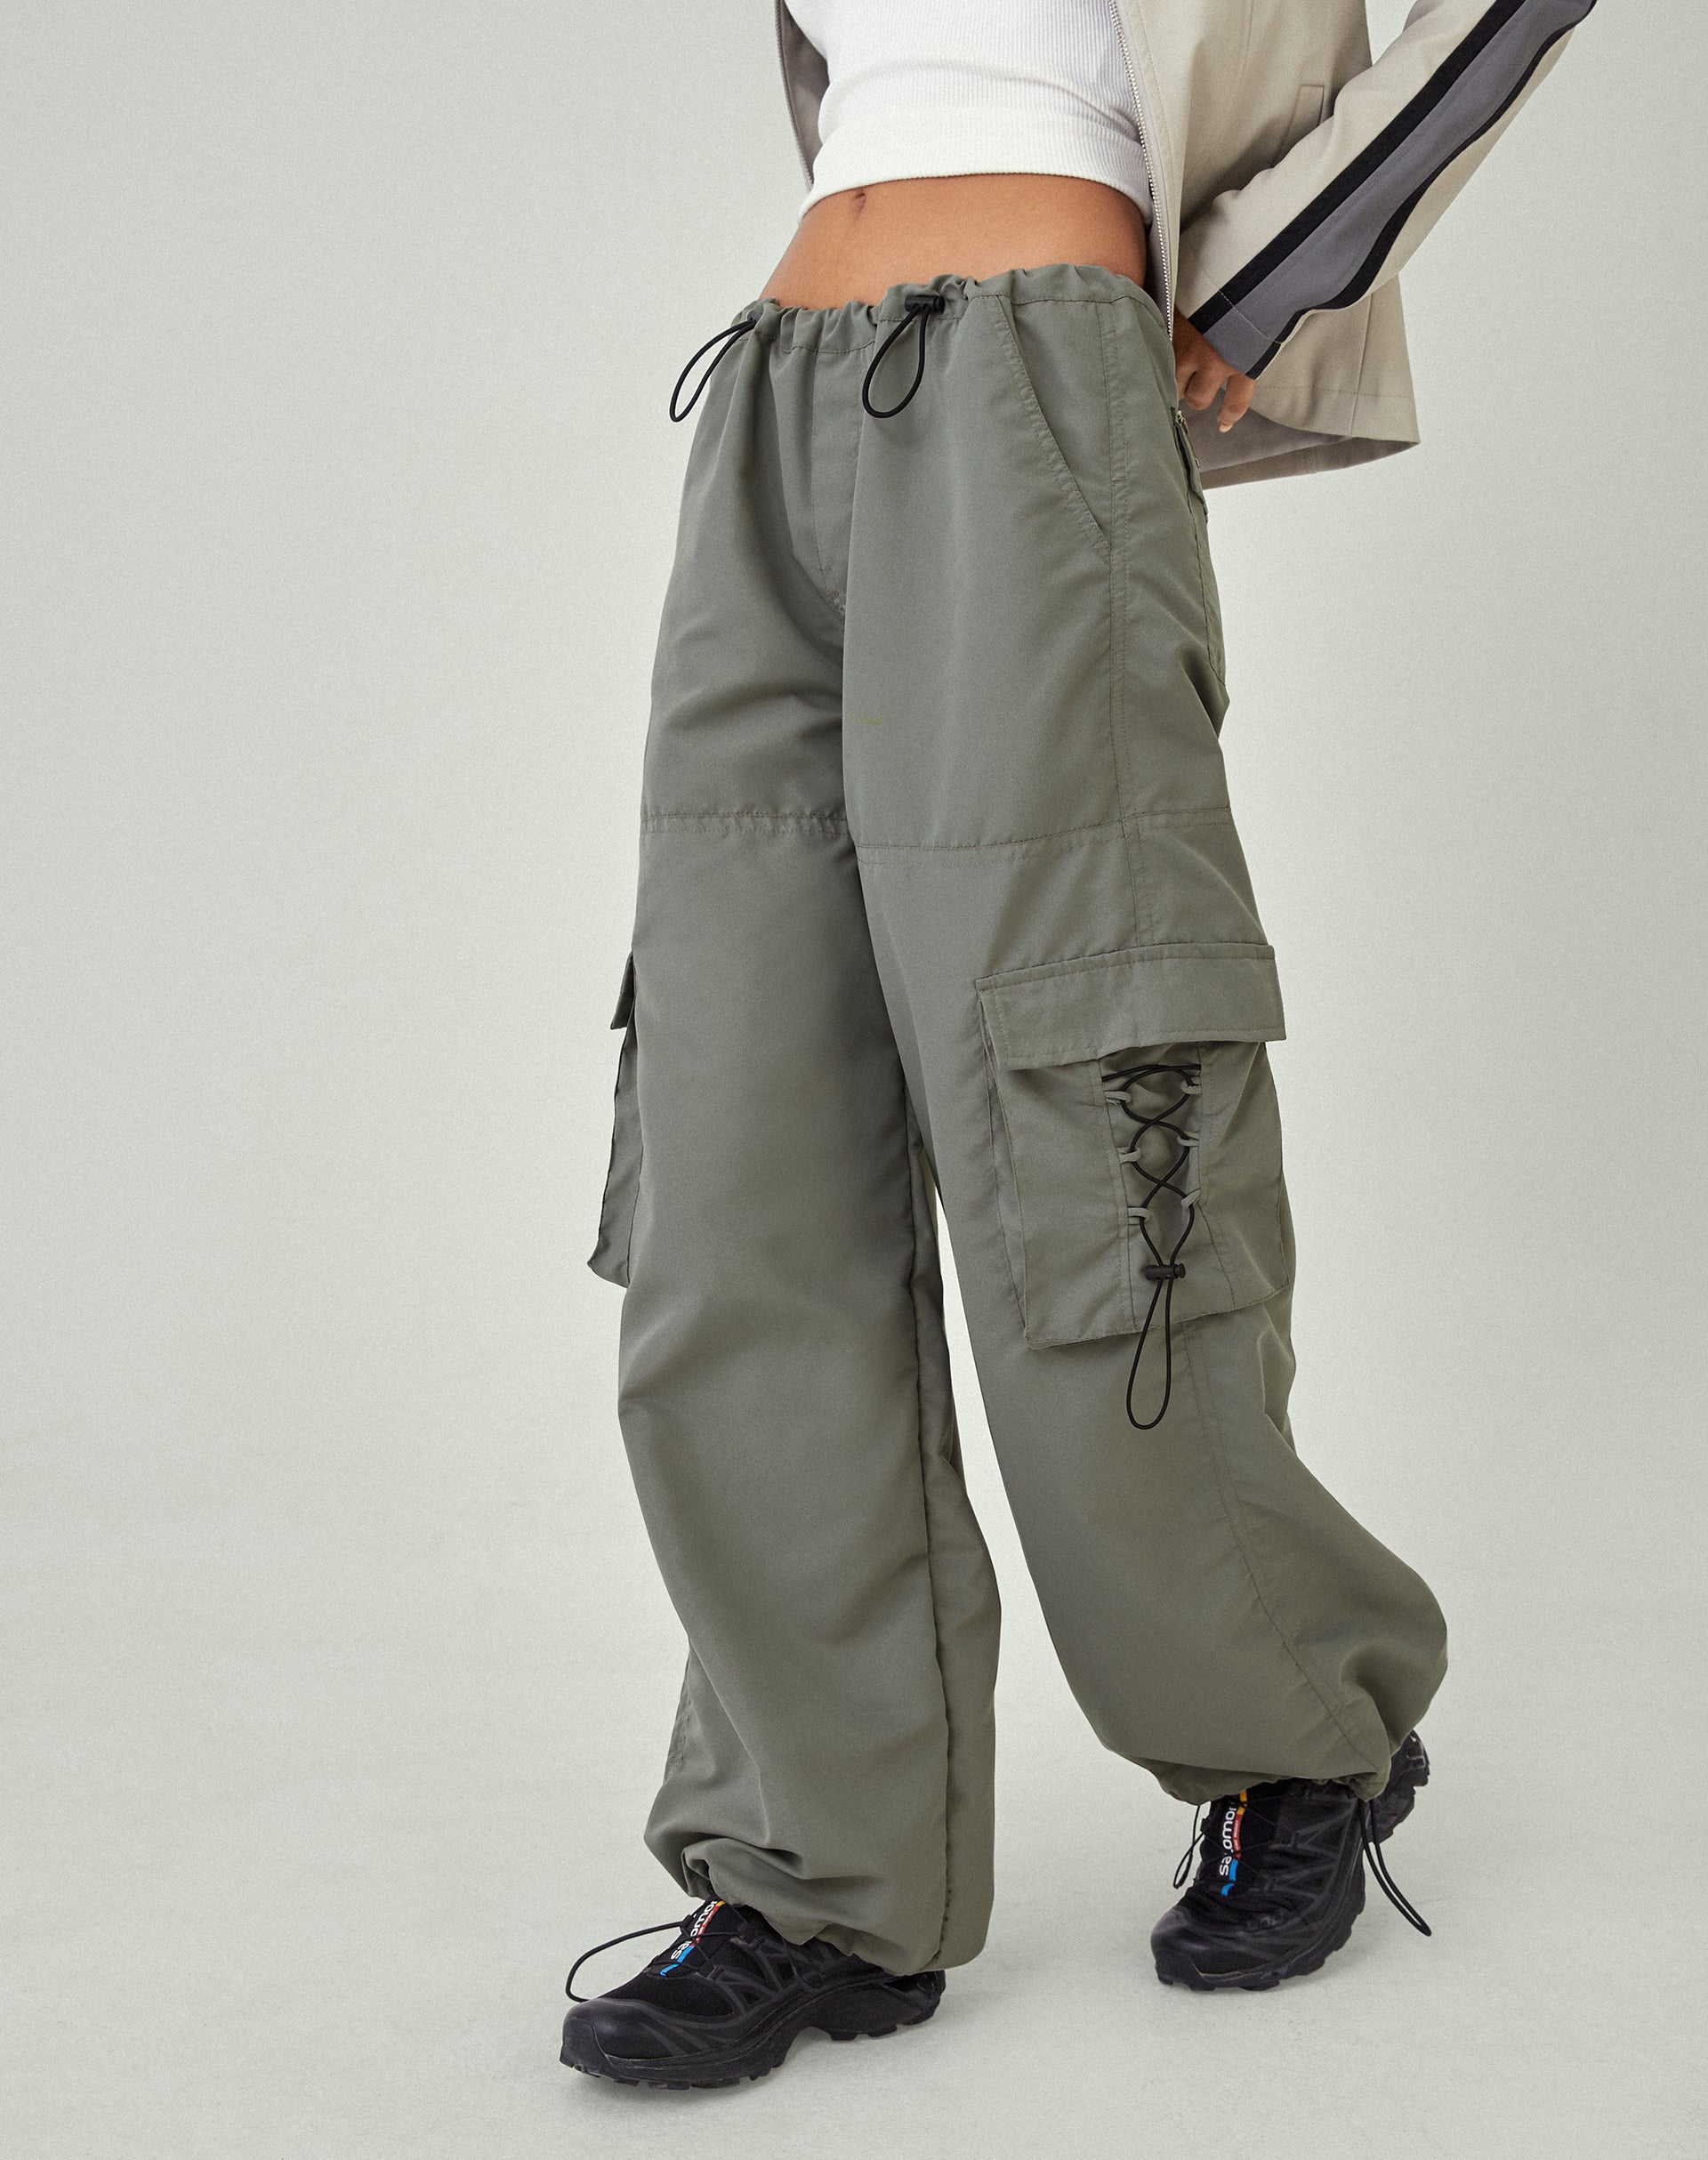 ouat STEEL CHANNEL TROUSERS 009 - ワークパンツ